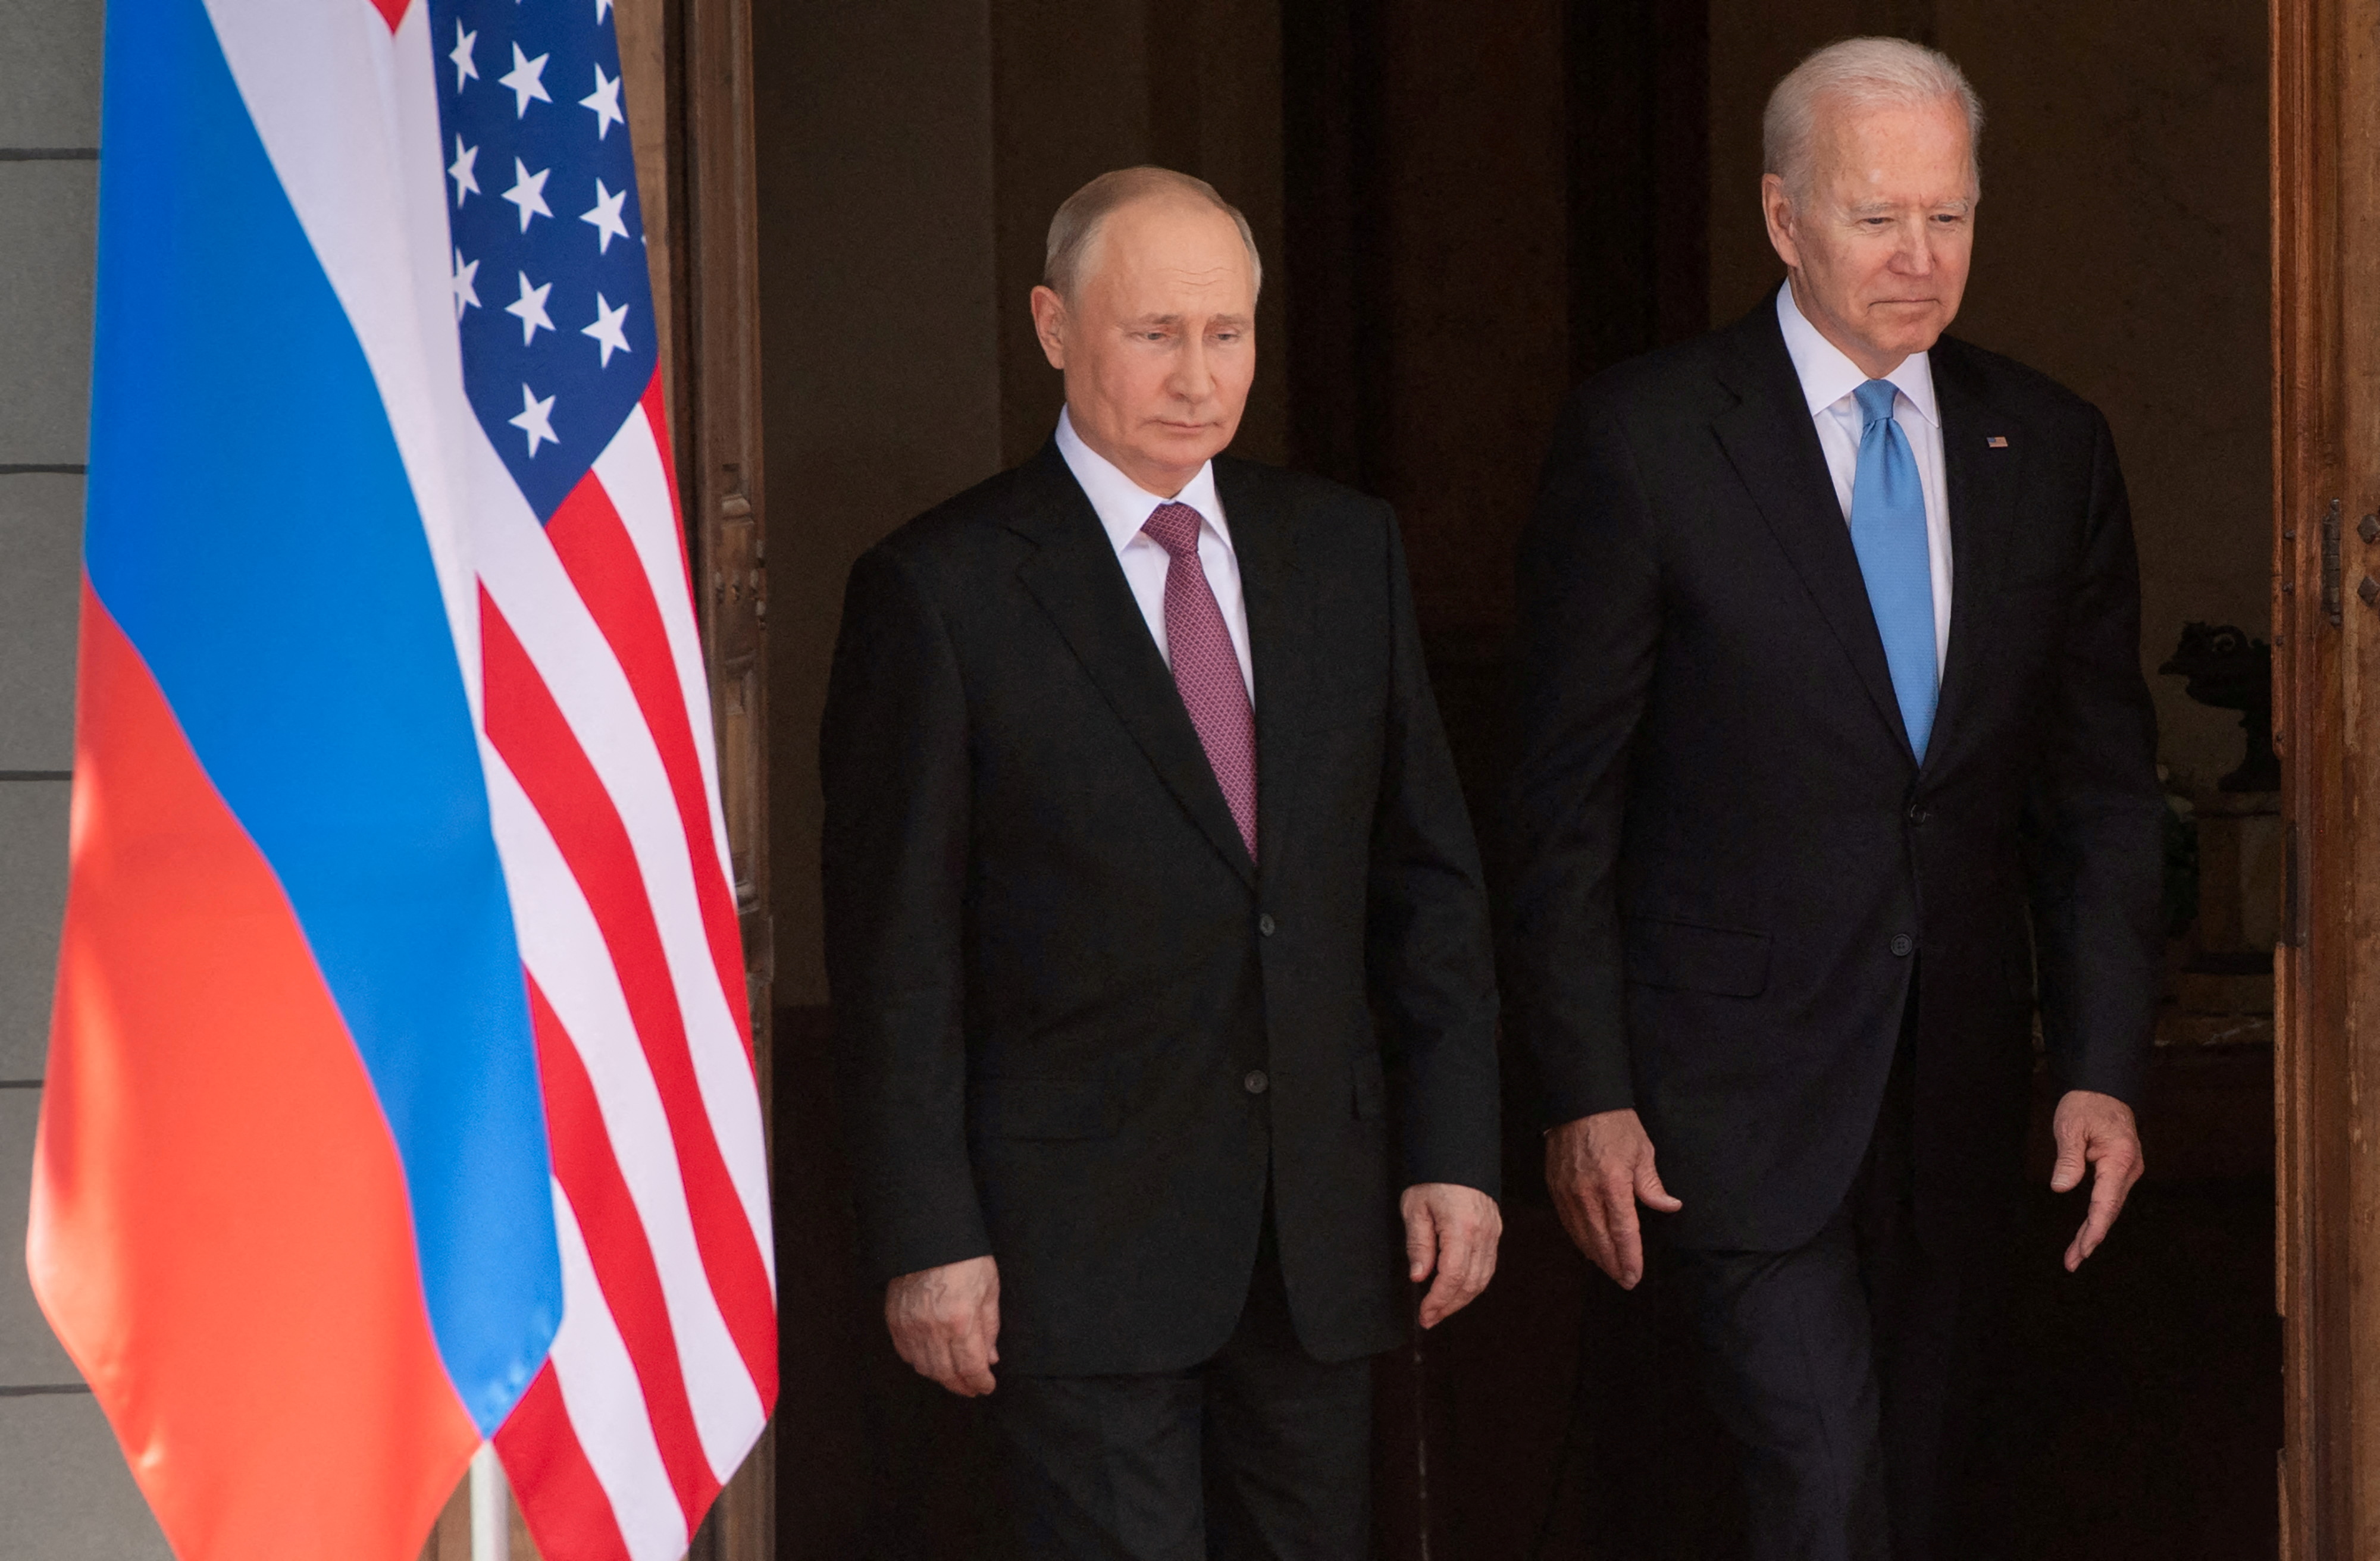 biden and putin agree in principle to ukraine summit- french presidency | reuters